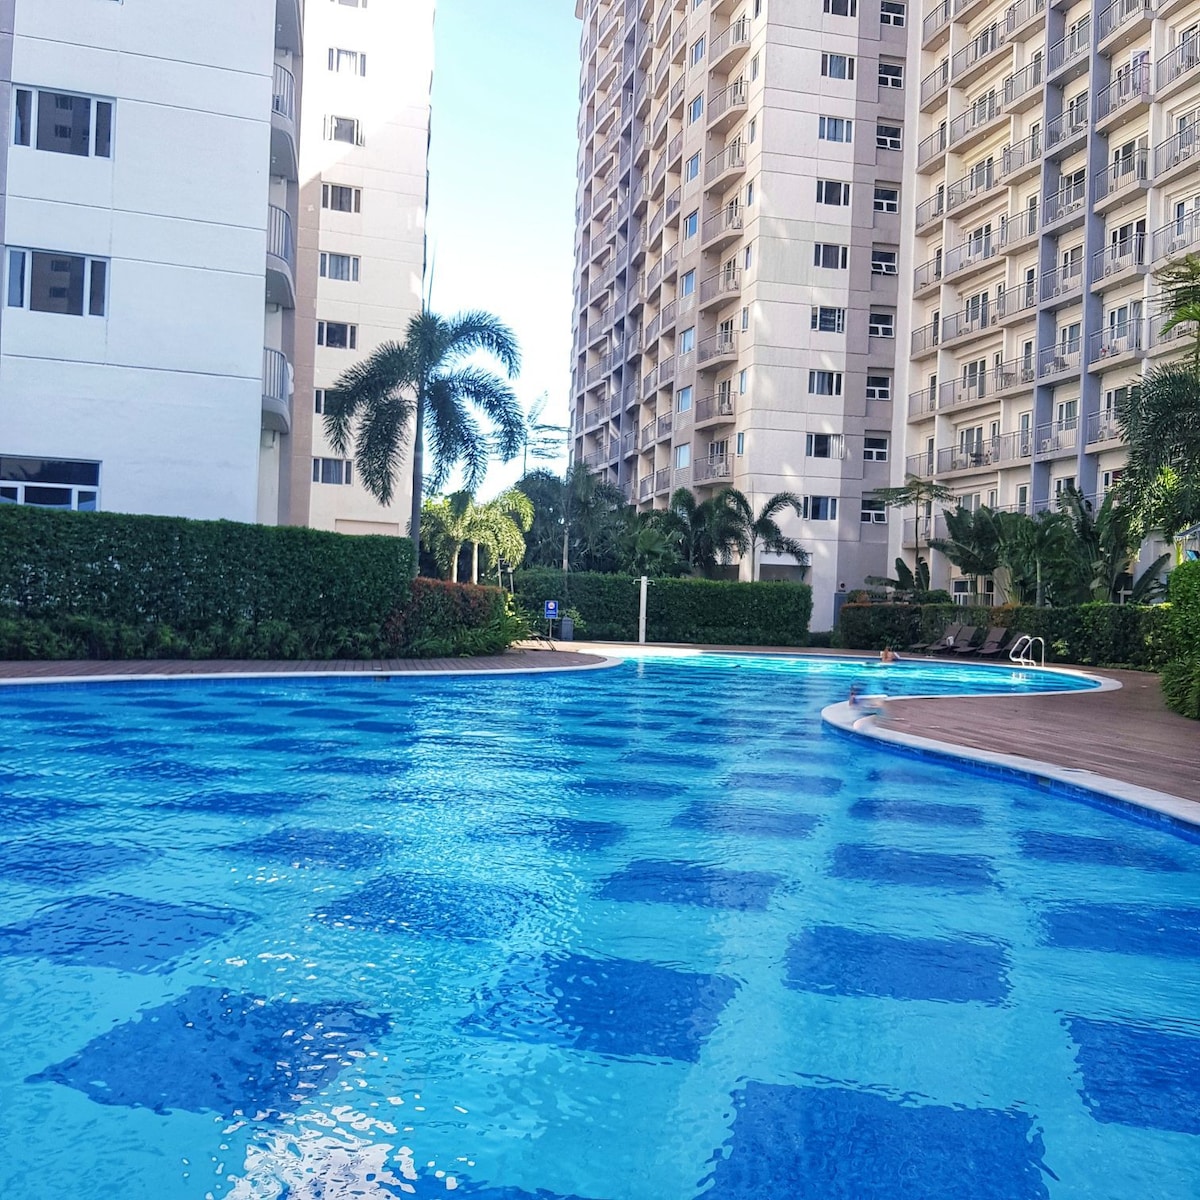 A-stay @ South Residences (2BR)